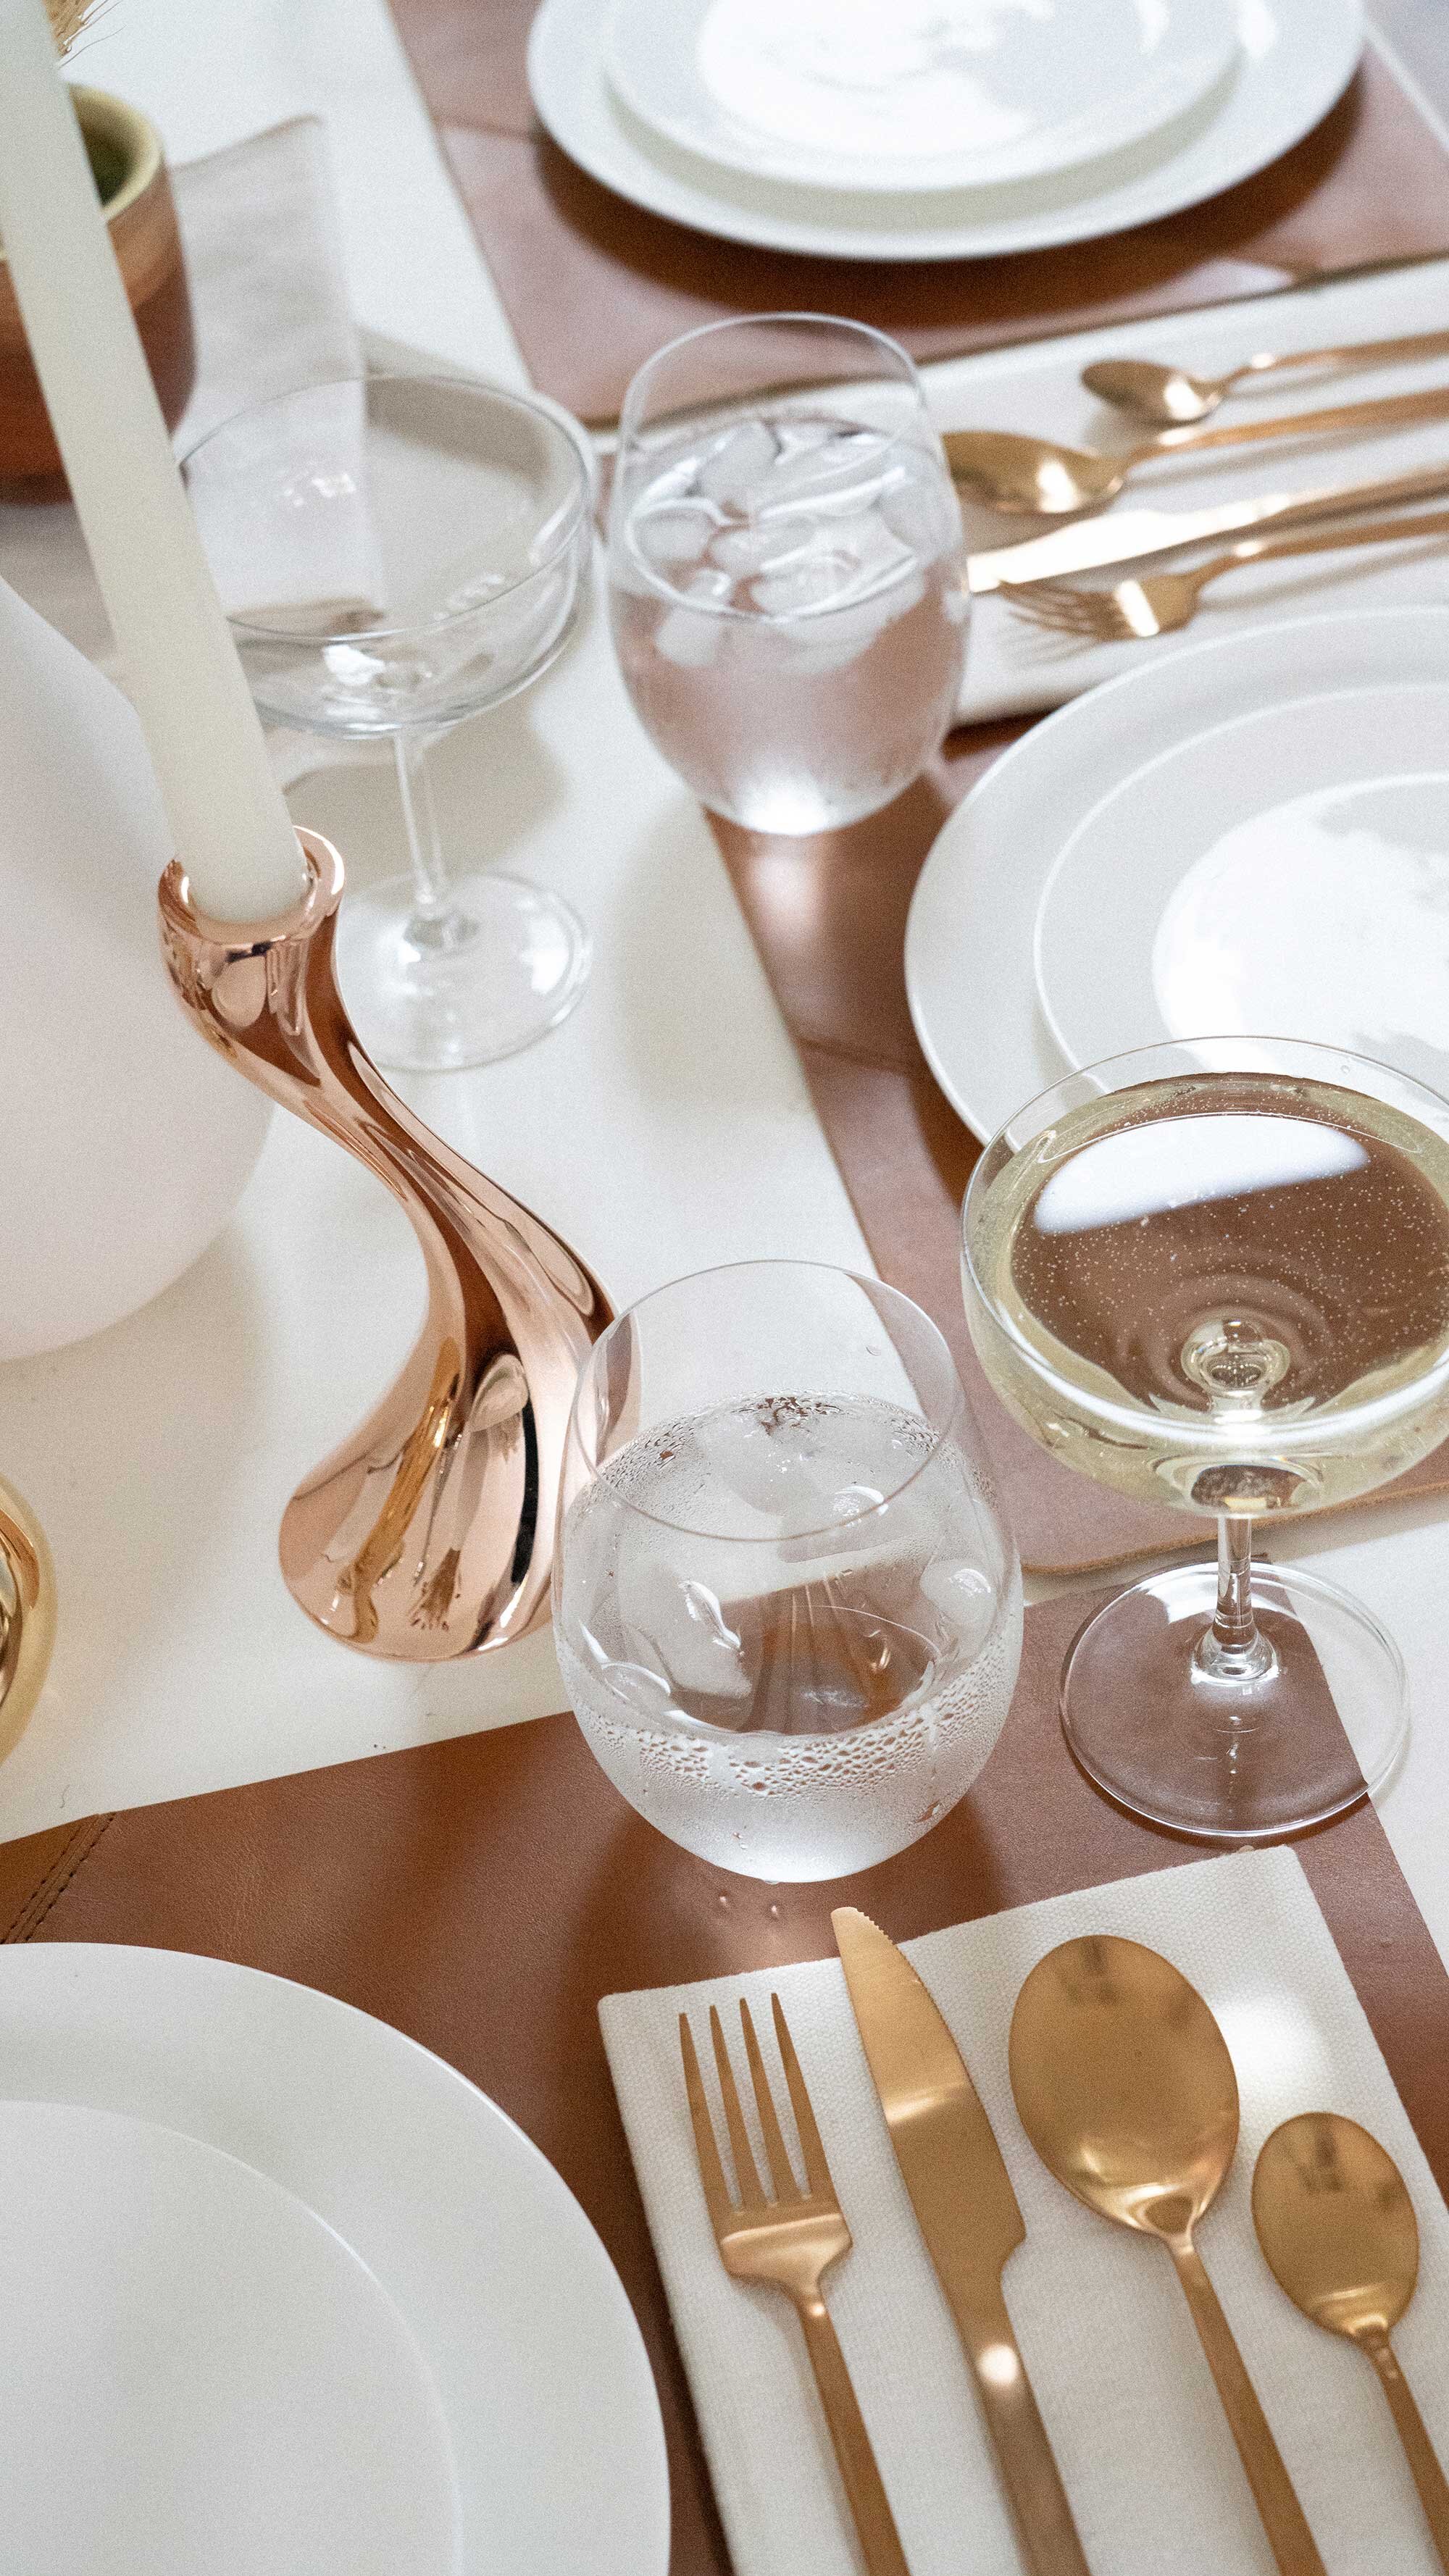 Thanksgiving table settings elegant gold. Sarah Butler of @sarahchristine Thanksgiving table settings featuring Georg Jensen Cobra Candleholder Set, tan leather placemats, and modern gold plated flatware with rustic dried flowers 33.jpg